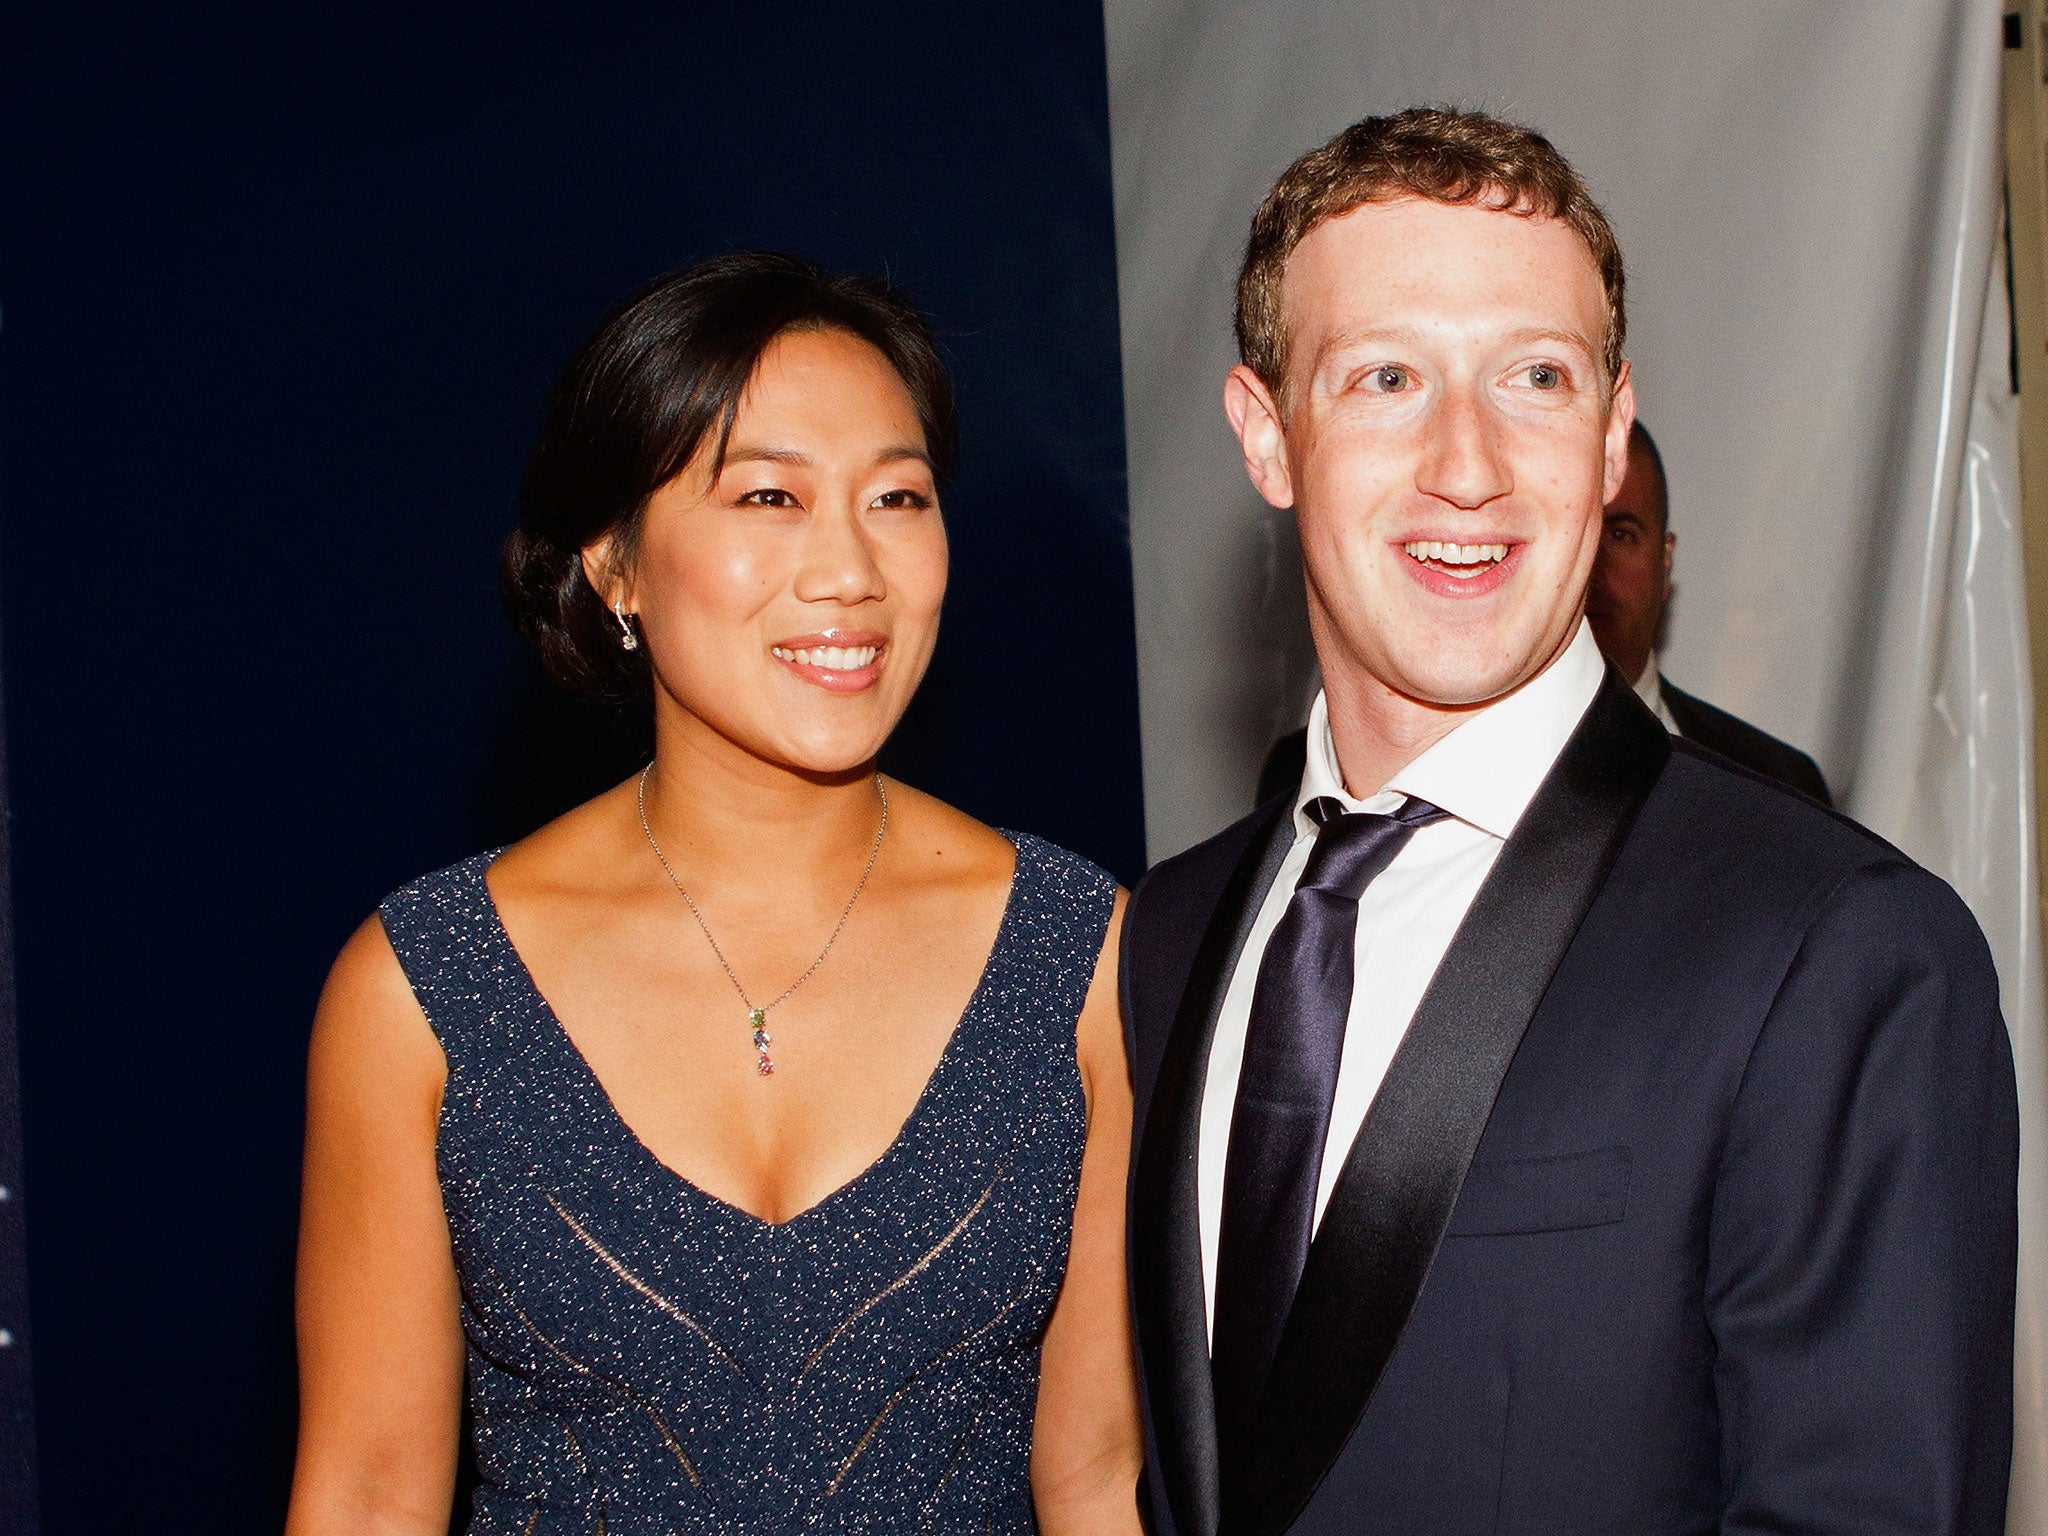 Zuckerberg and his wife Pricilla Chan are expecting a daughter